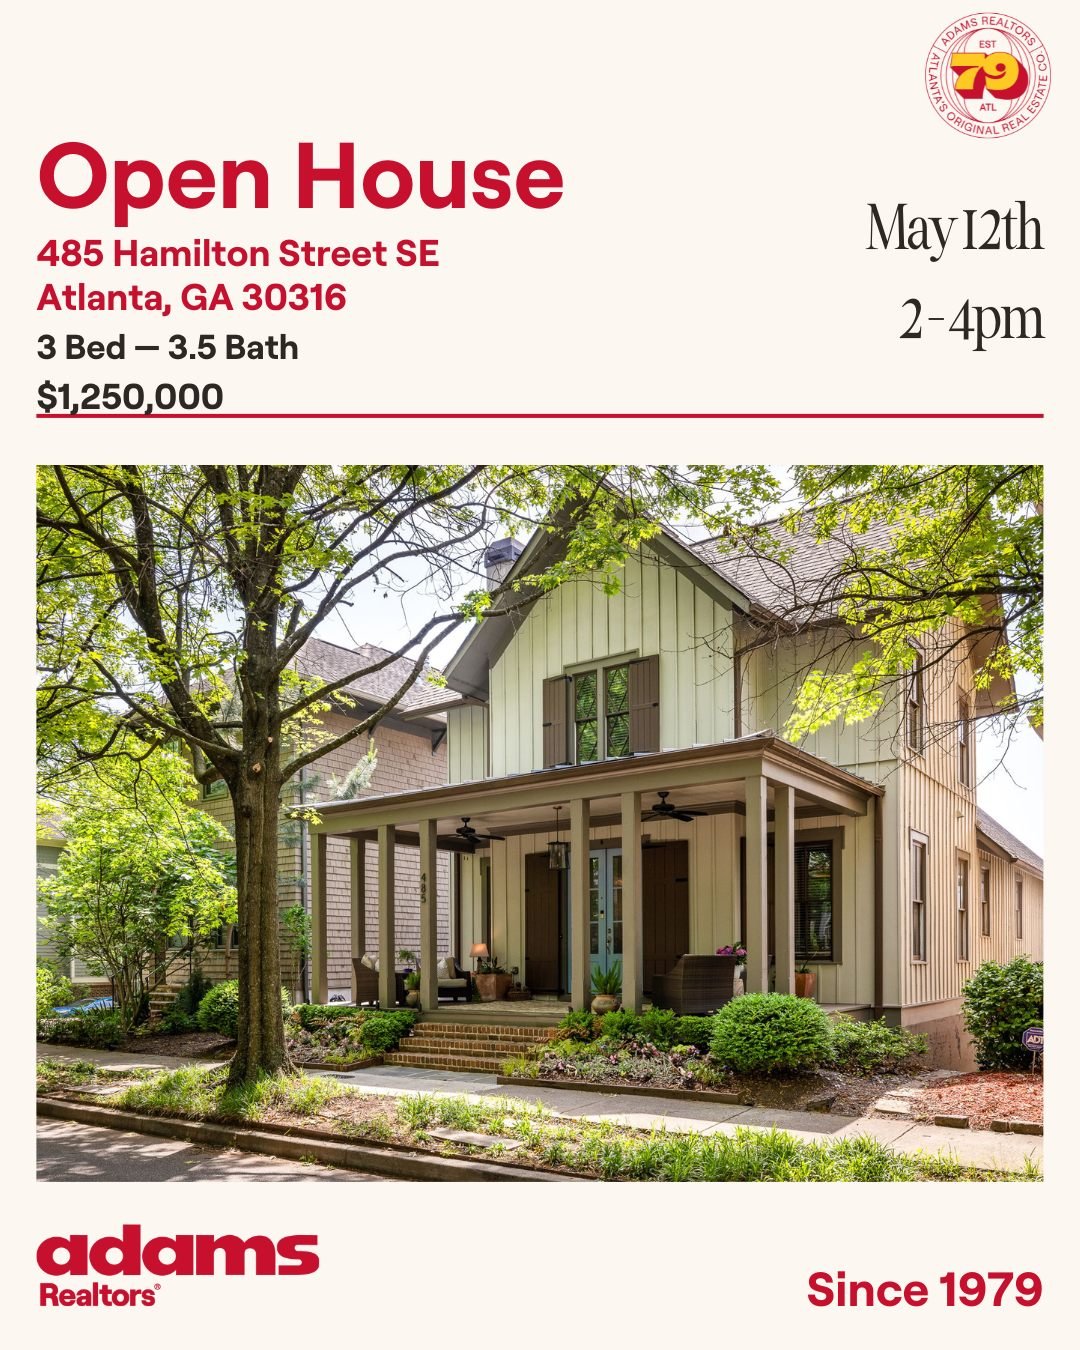 Open House Sunday, May 12th from 2-4pm in Glenwood Park! 485 Hamilton St 3 BR | 3.5 BA $1,250,000

Located near the Atlanta Beltline, this lovely Earthcraft home in desirable Glenwood Park has hardwood floors throughout and many sophisticated upgrade